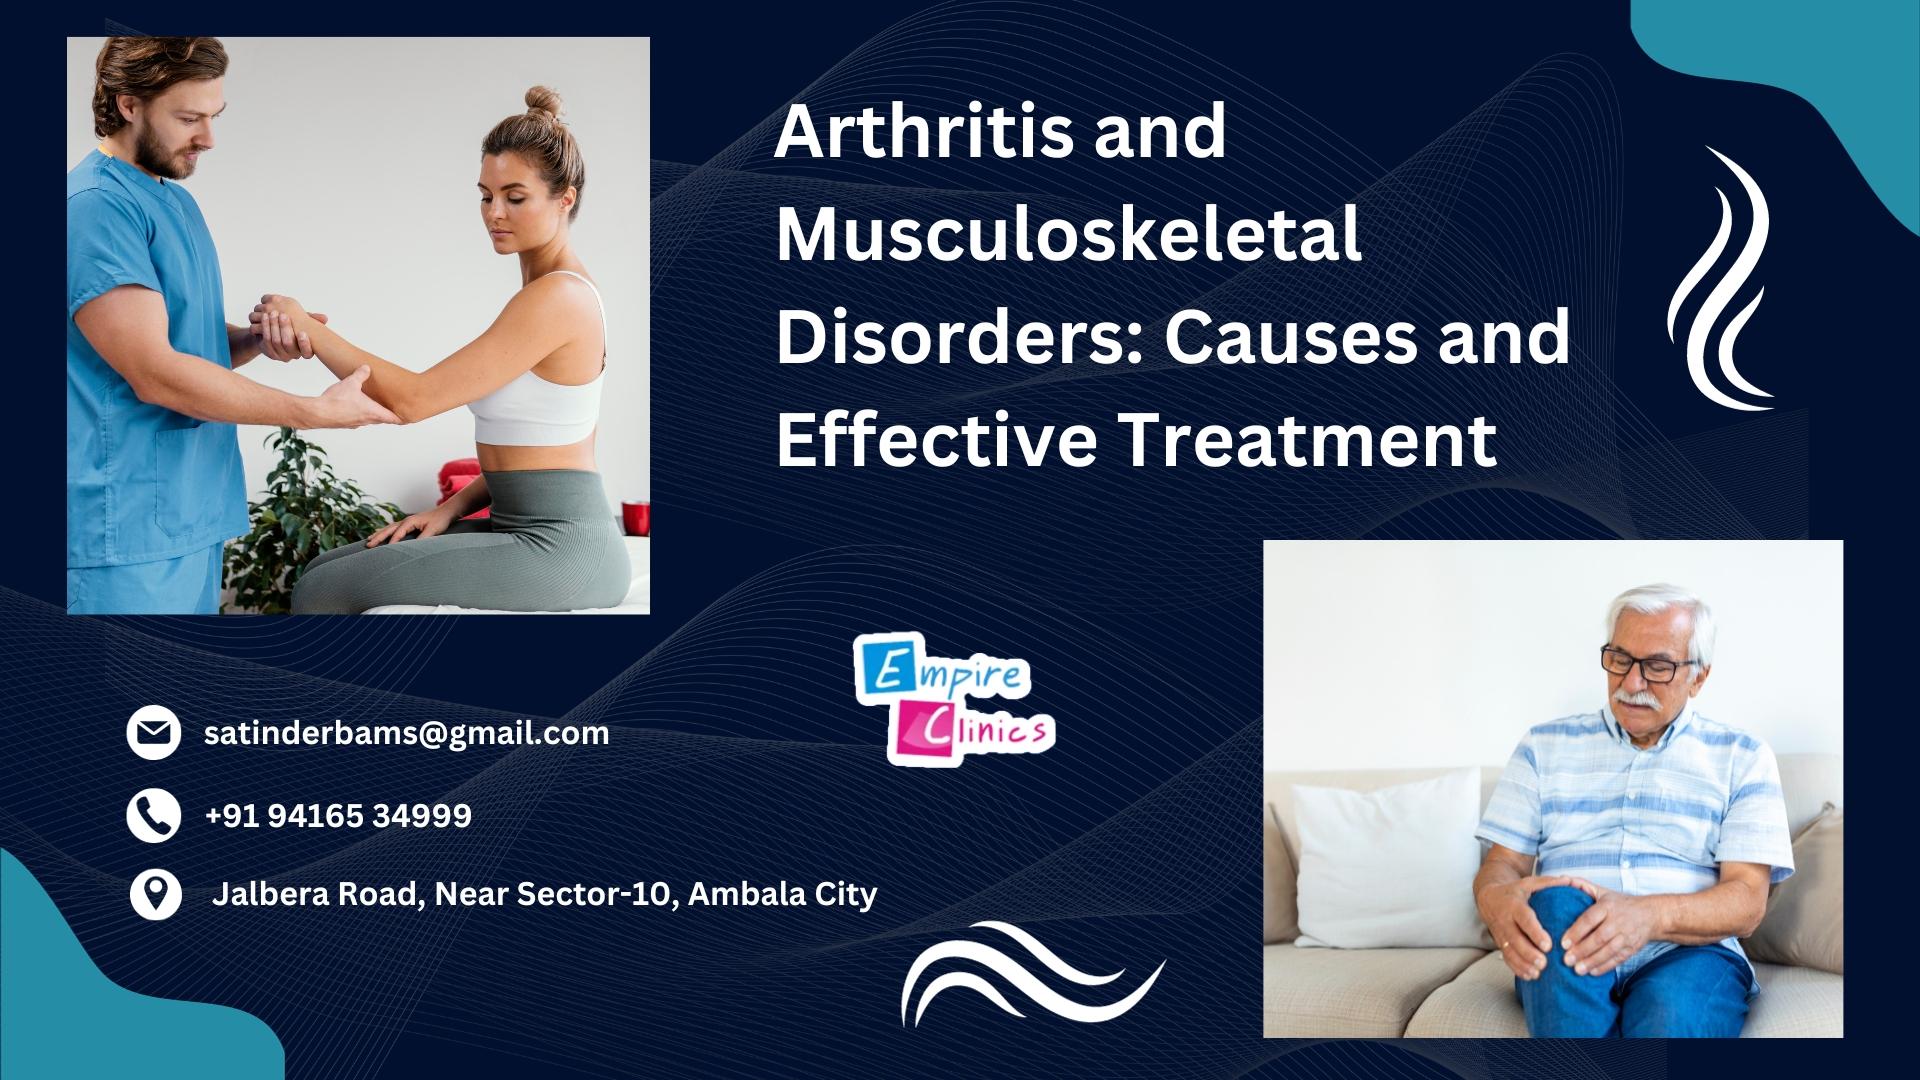 Arthritis and Musculoskeletal Disorders: Causes and Effective Treatment